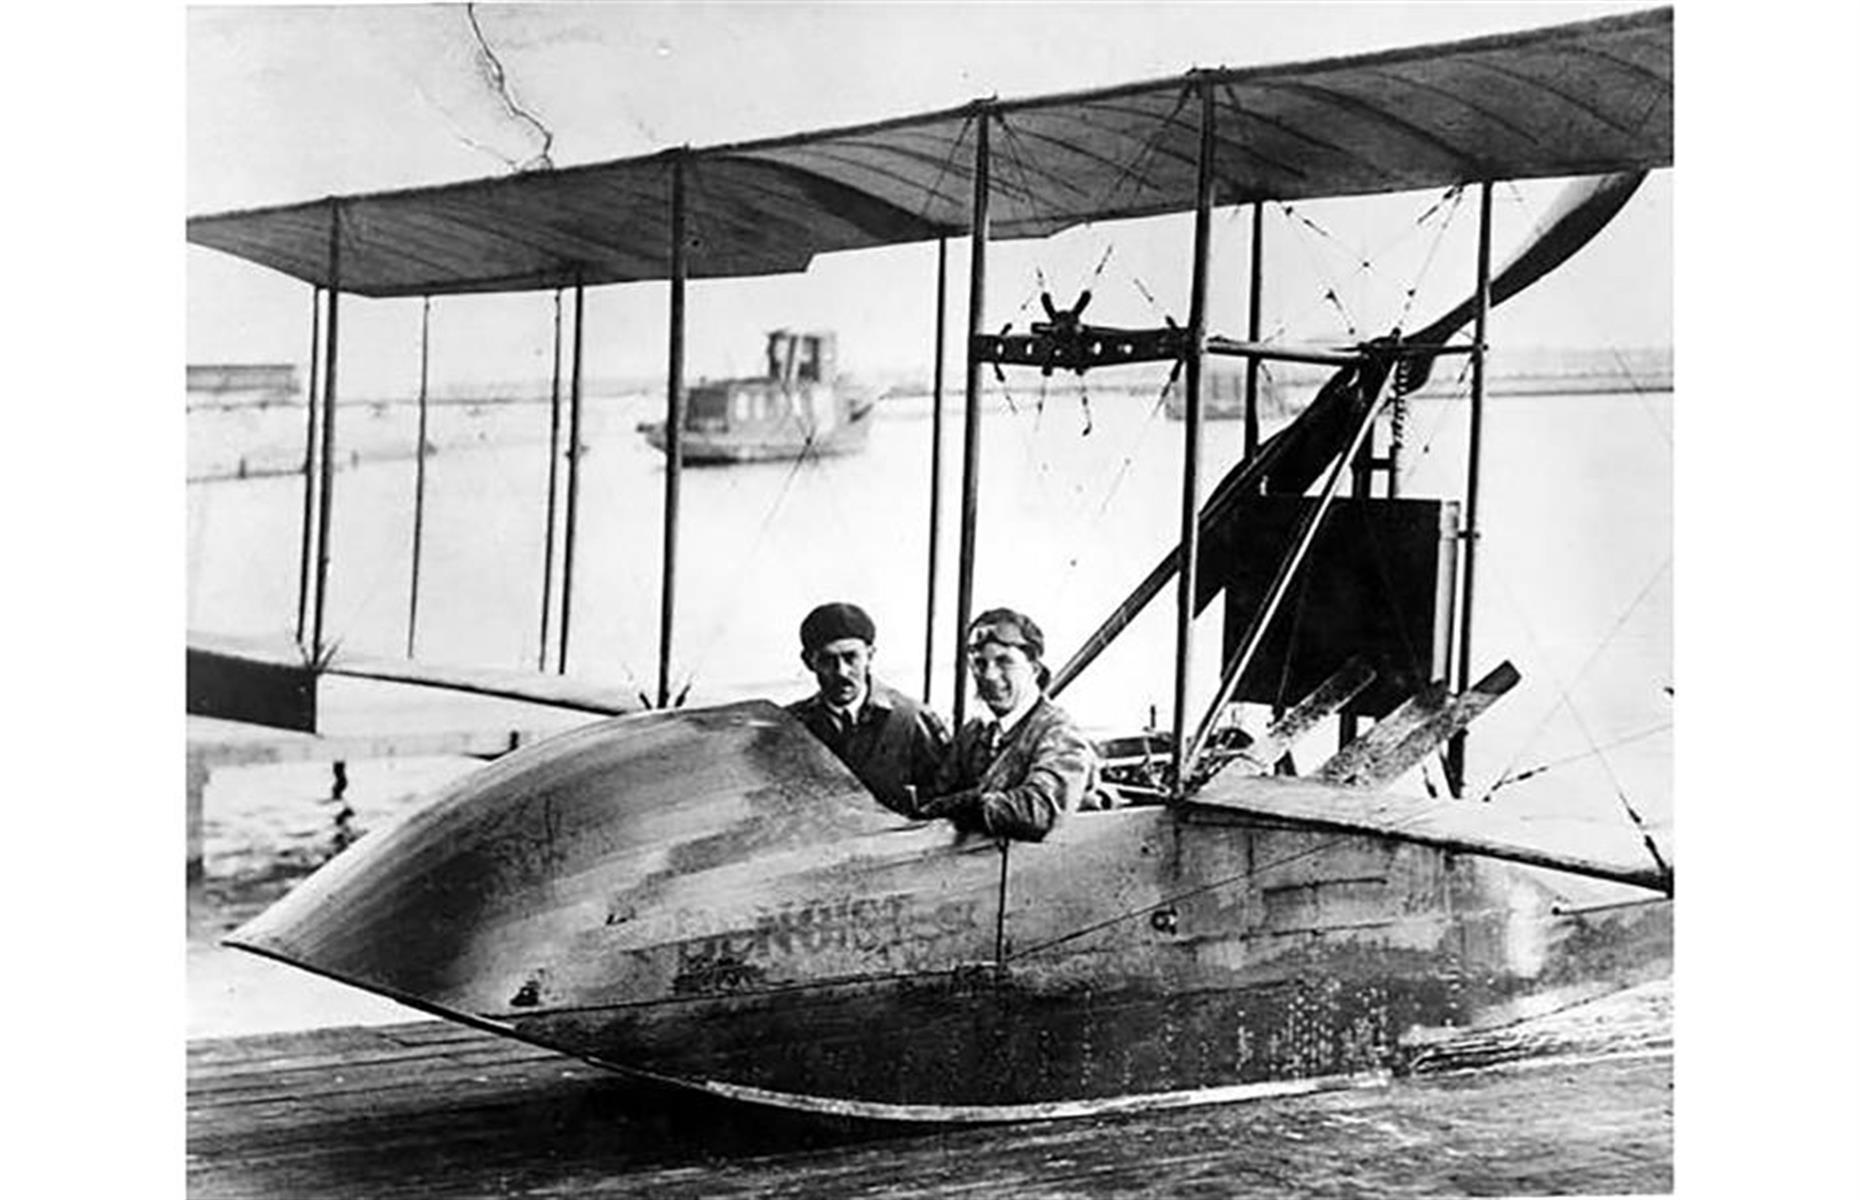 This rather modest looking flying boat was in fact responsible for the world's first scheduled airline flight. Designed by Thomas W. Benoist, the Benoist Type XIV flew from St Petersburg to Tampa in Florida in 1914 and was one of two aircraft belonging to the St Petersburg–Tampa Airboat Line.